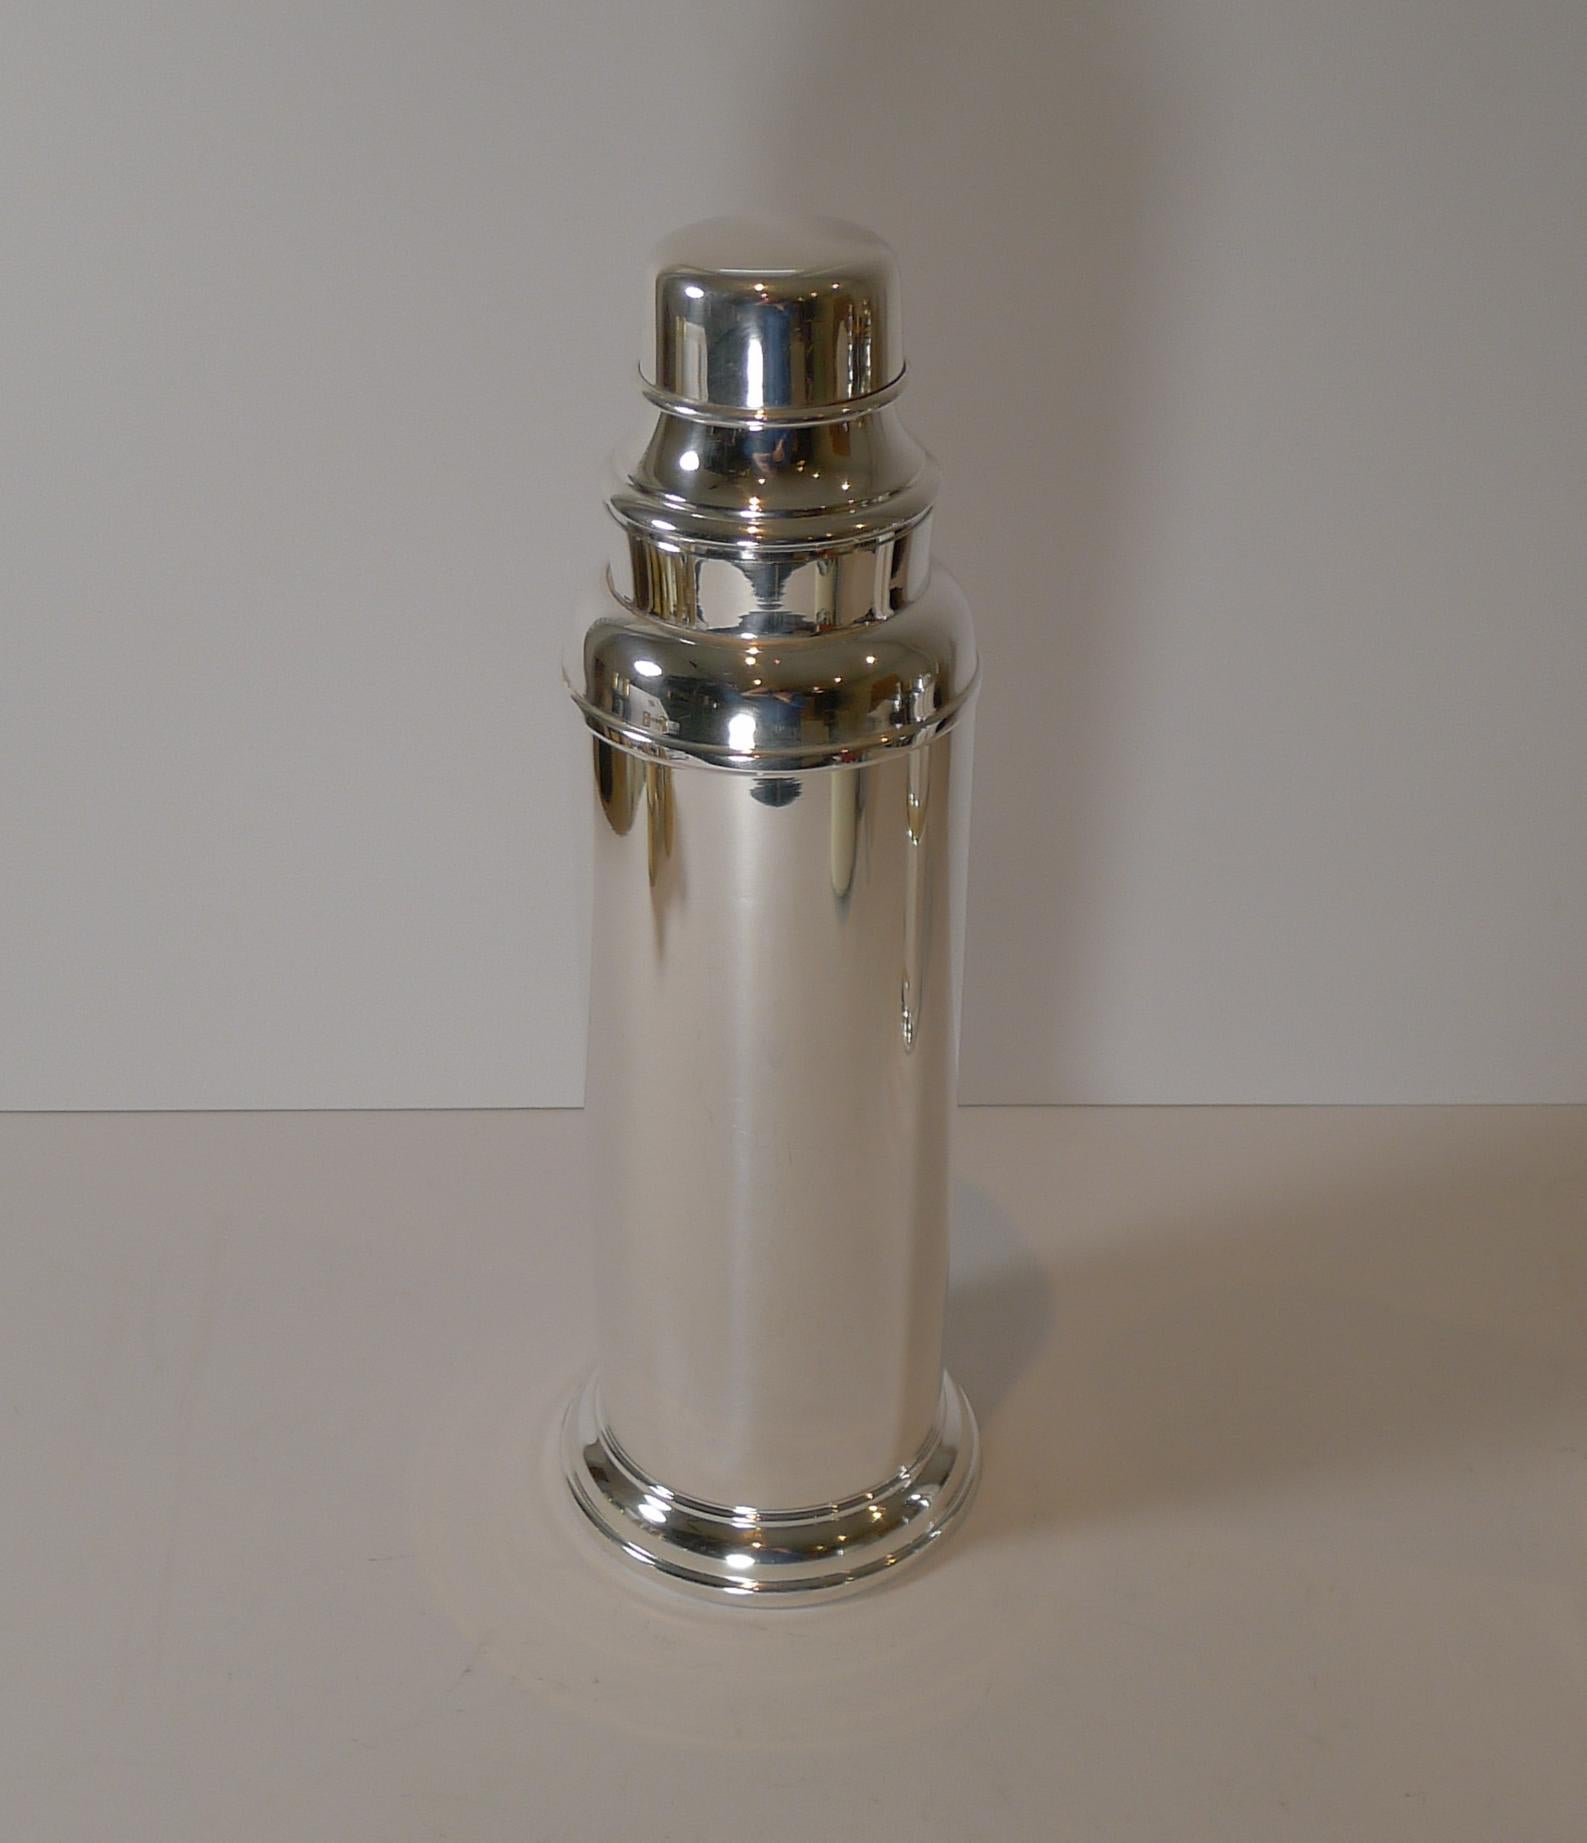 A stunning tall silver plated cocktail shaker made by the Sheffield Silver Co., Brooklyn, New York in c.1940; fully marked on the underside.

Just back from our silversmith's workshop where it has been professionally cleaned and polished,